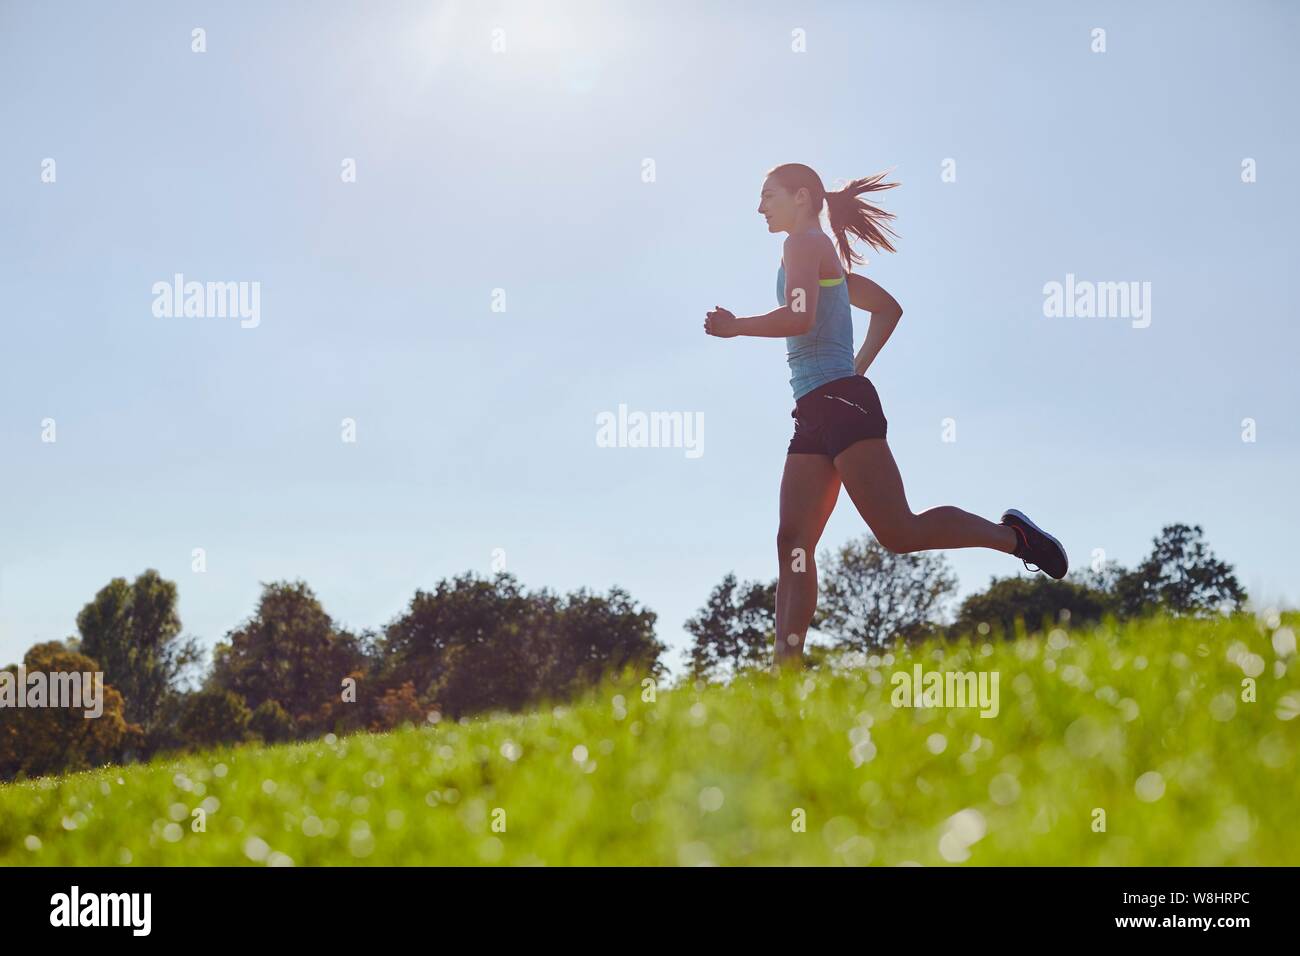 Young woman jogging in a field. Stock Photo